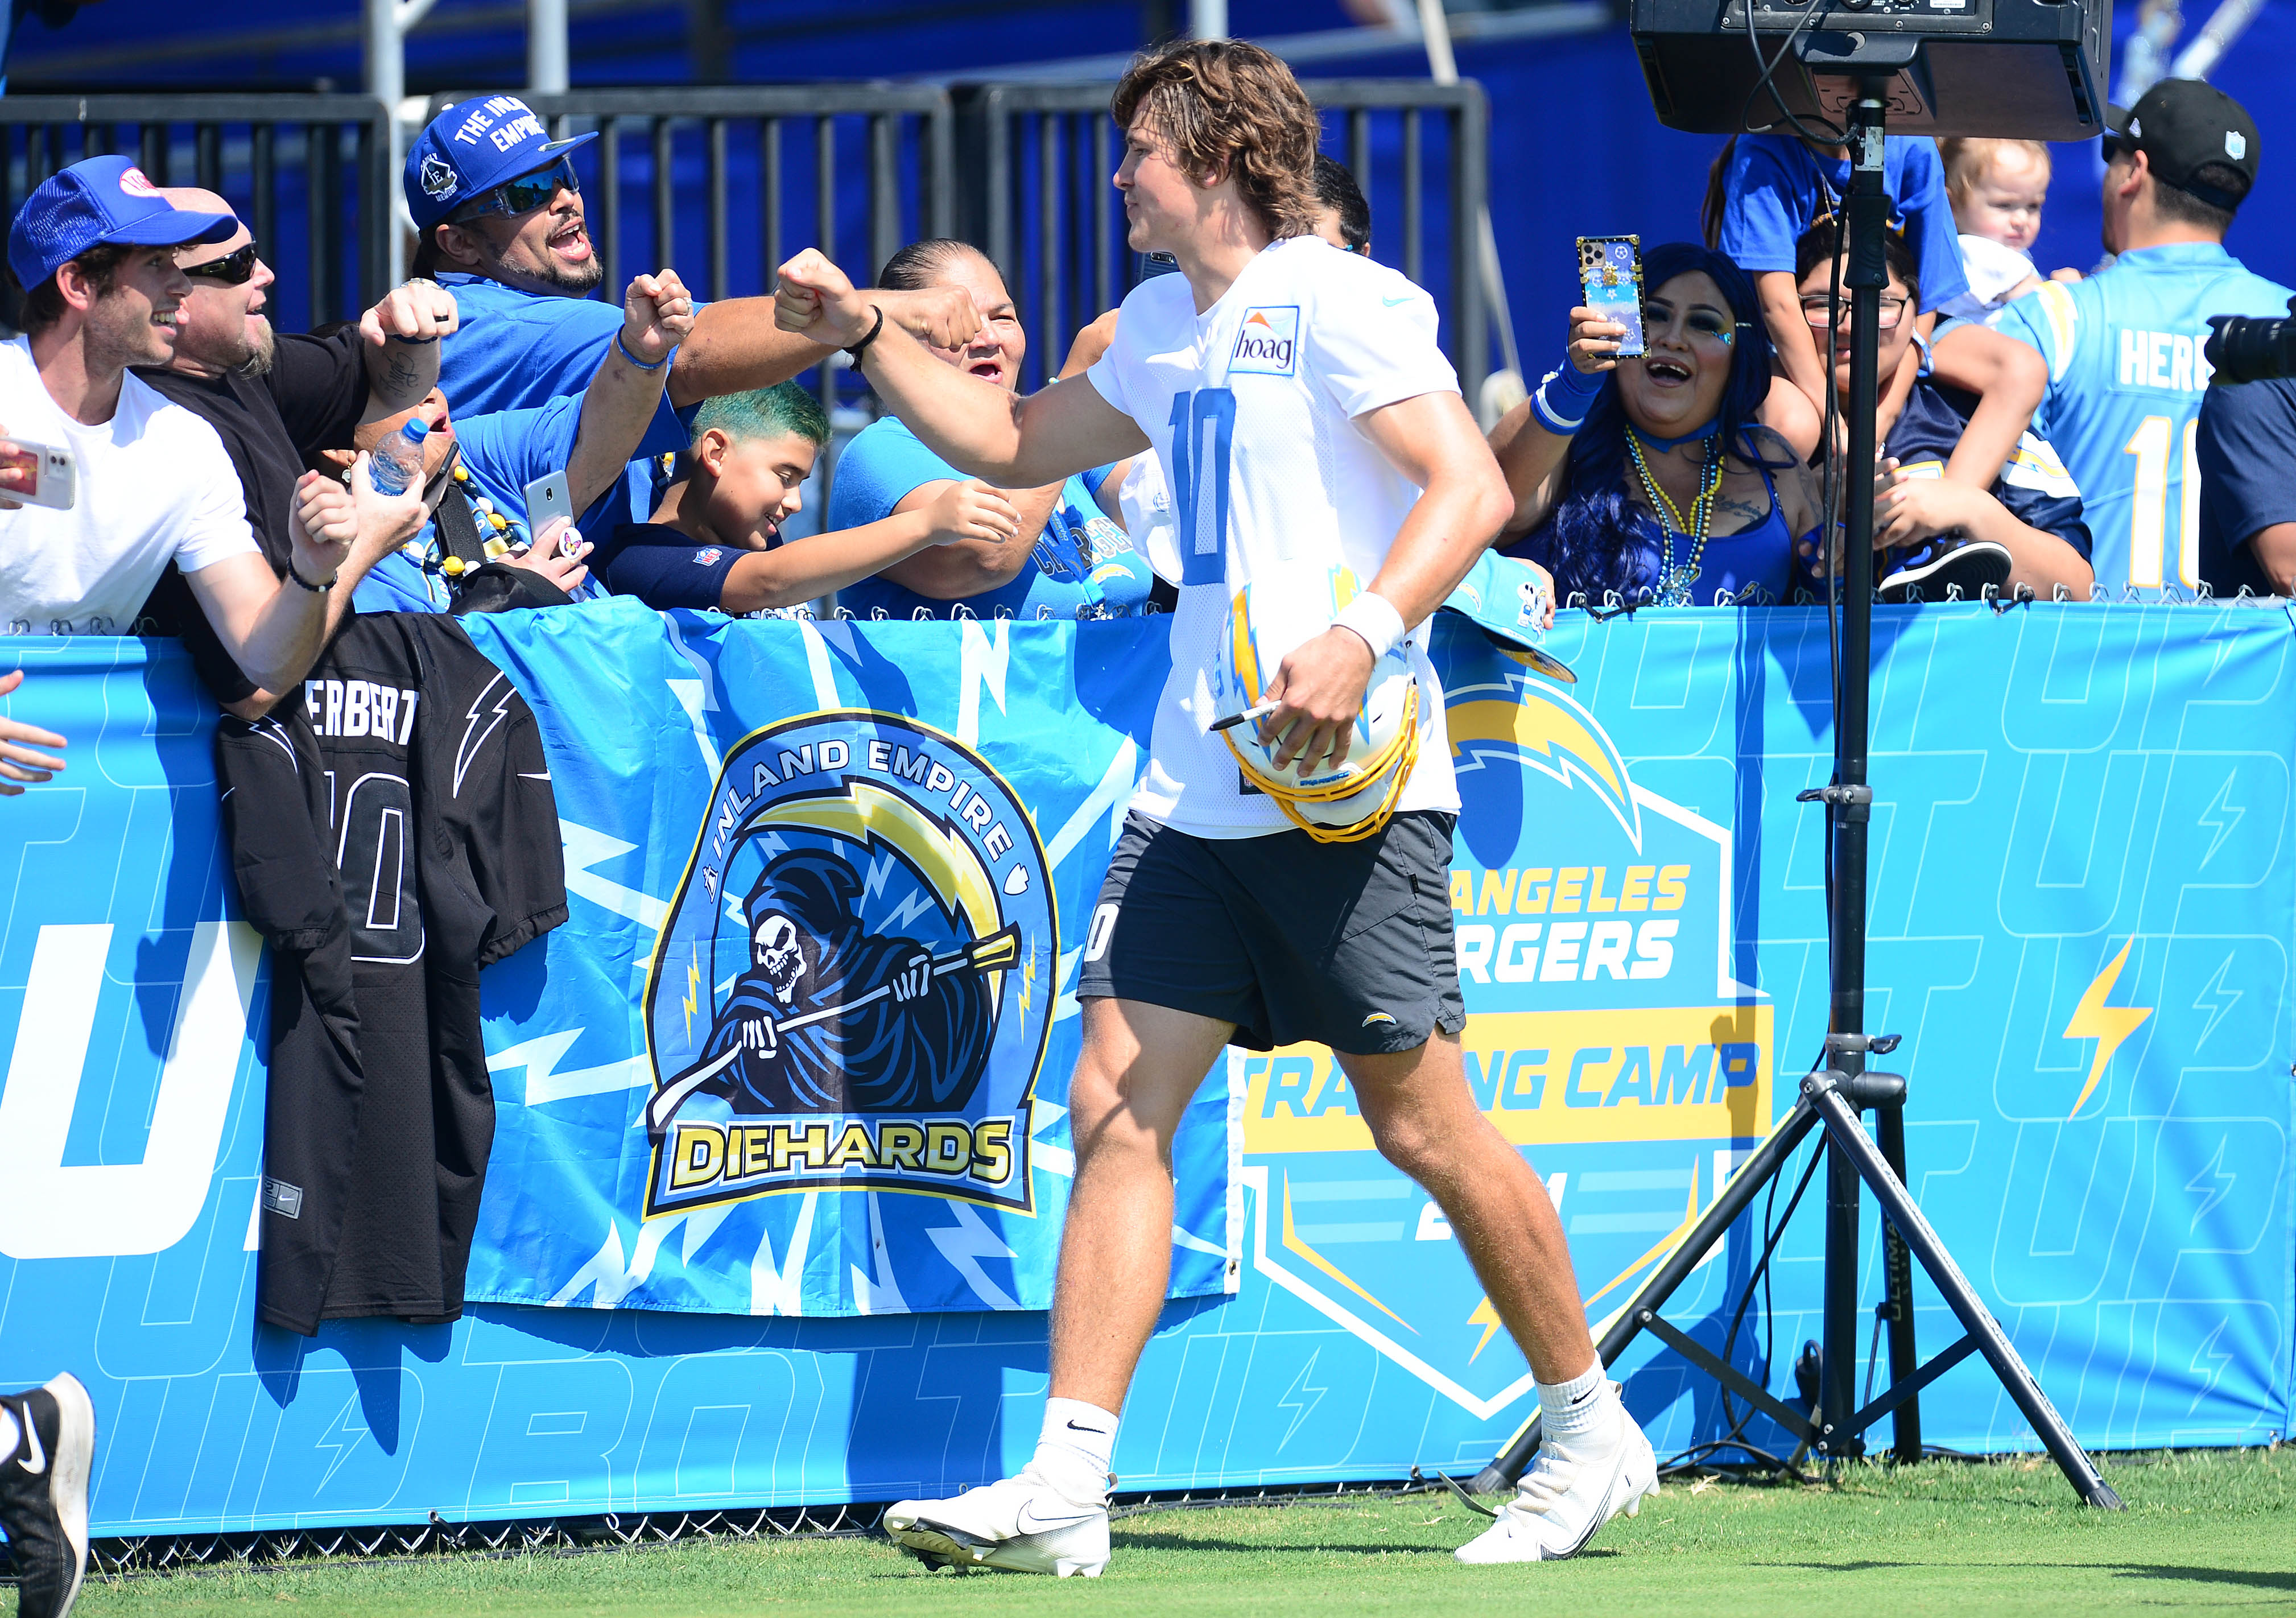 Jul 28, 2021; Costa Mesa, CA, United States; Los Angeles Chargers quarterback Justin Herbert (10) meets with fans following training camp at Jack Hammett Sports Complex. Mandatory Credit: Gary A. Vasquez-USA TODAY Sports